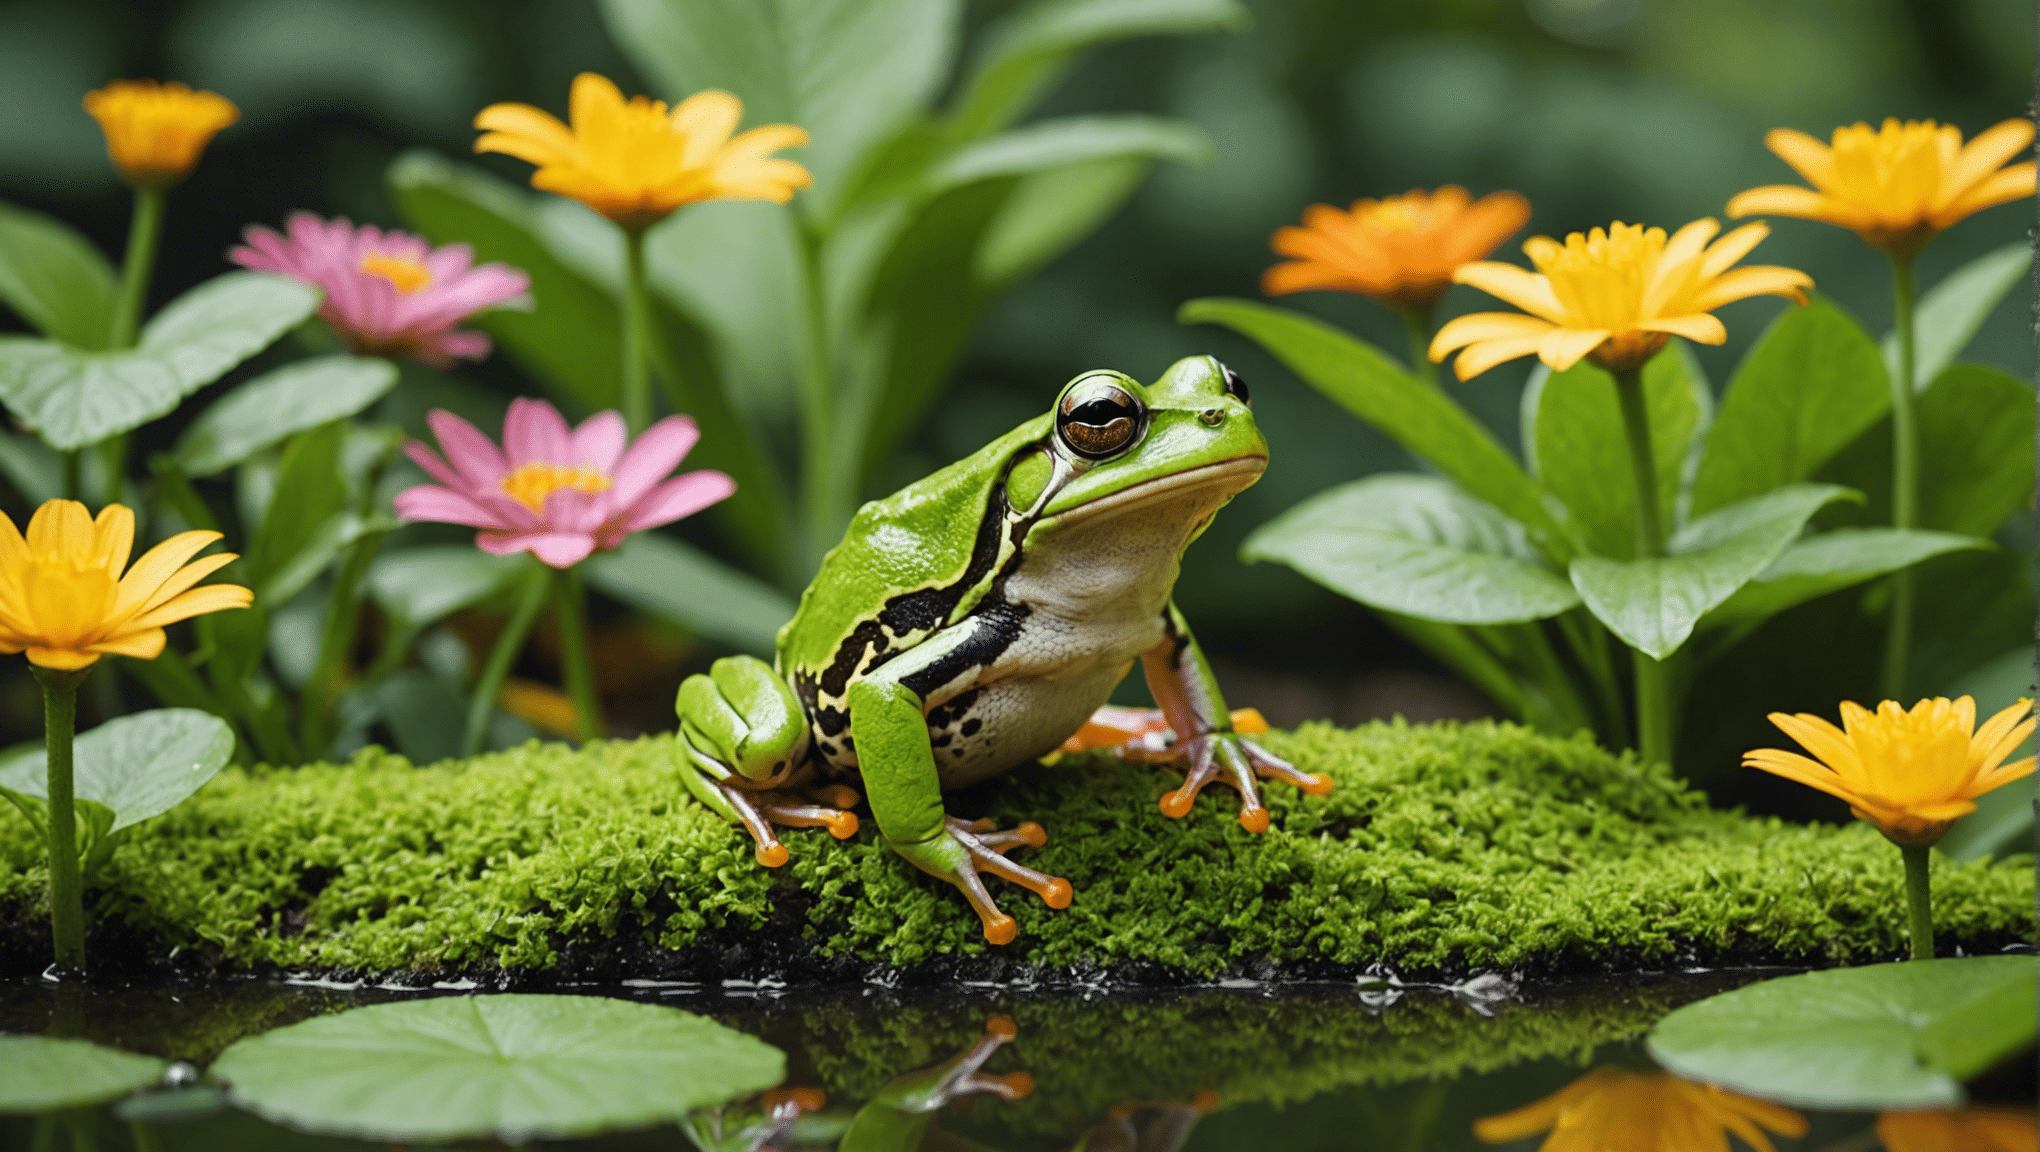 discover the small frogs that frequent your backyard with our comprehensive guide. learn about the diverse species and their habitats.